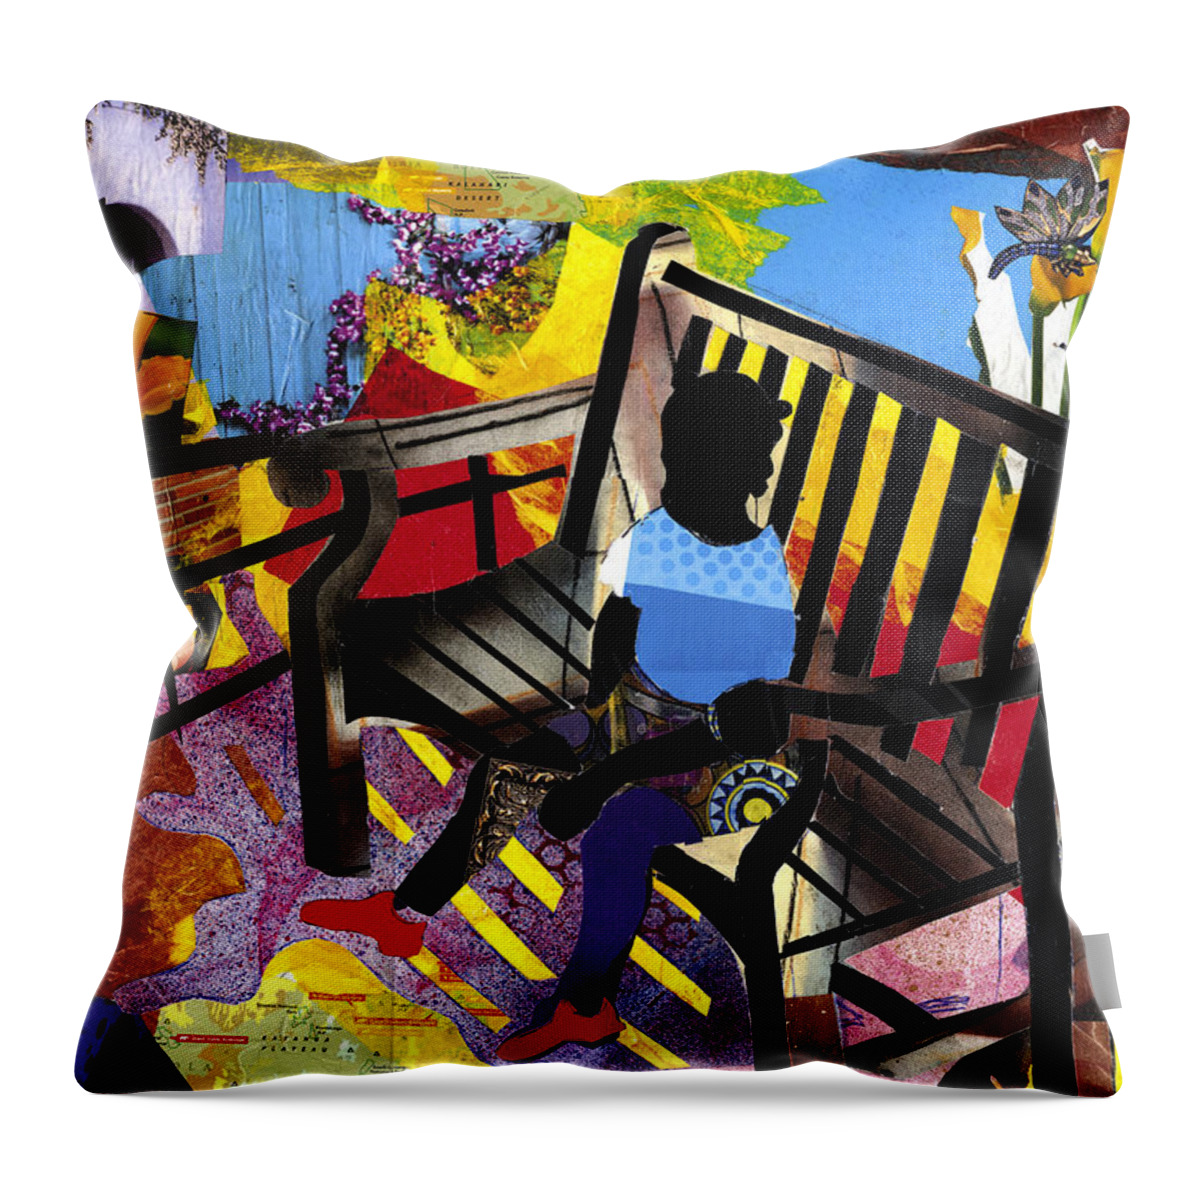 Everett Spruill Throw Pillow featuring the painting Girl In Red Shoes by Everett Spruill